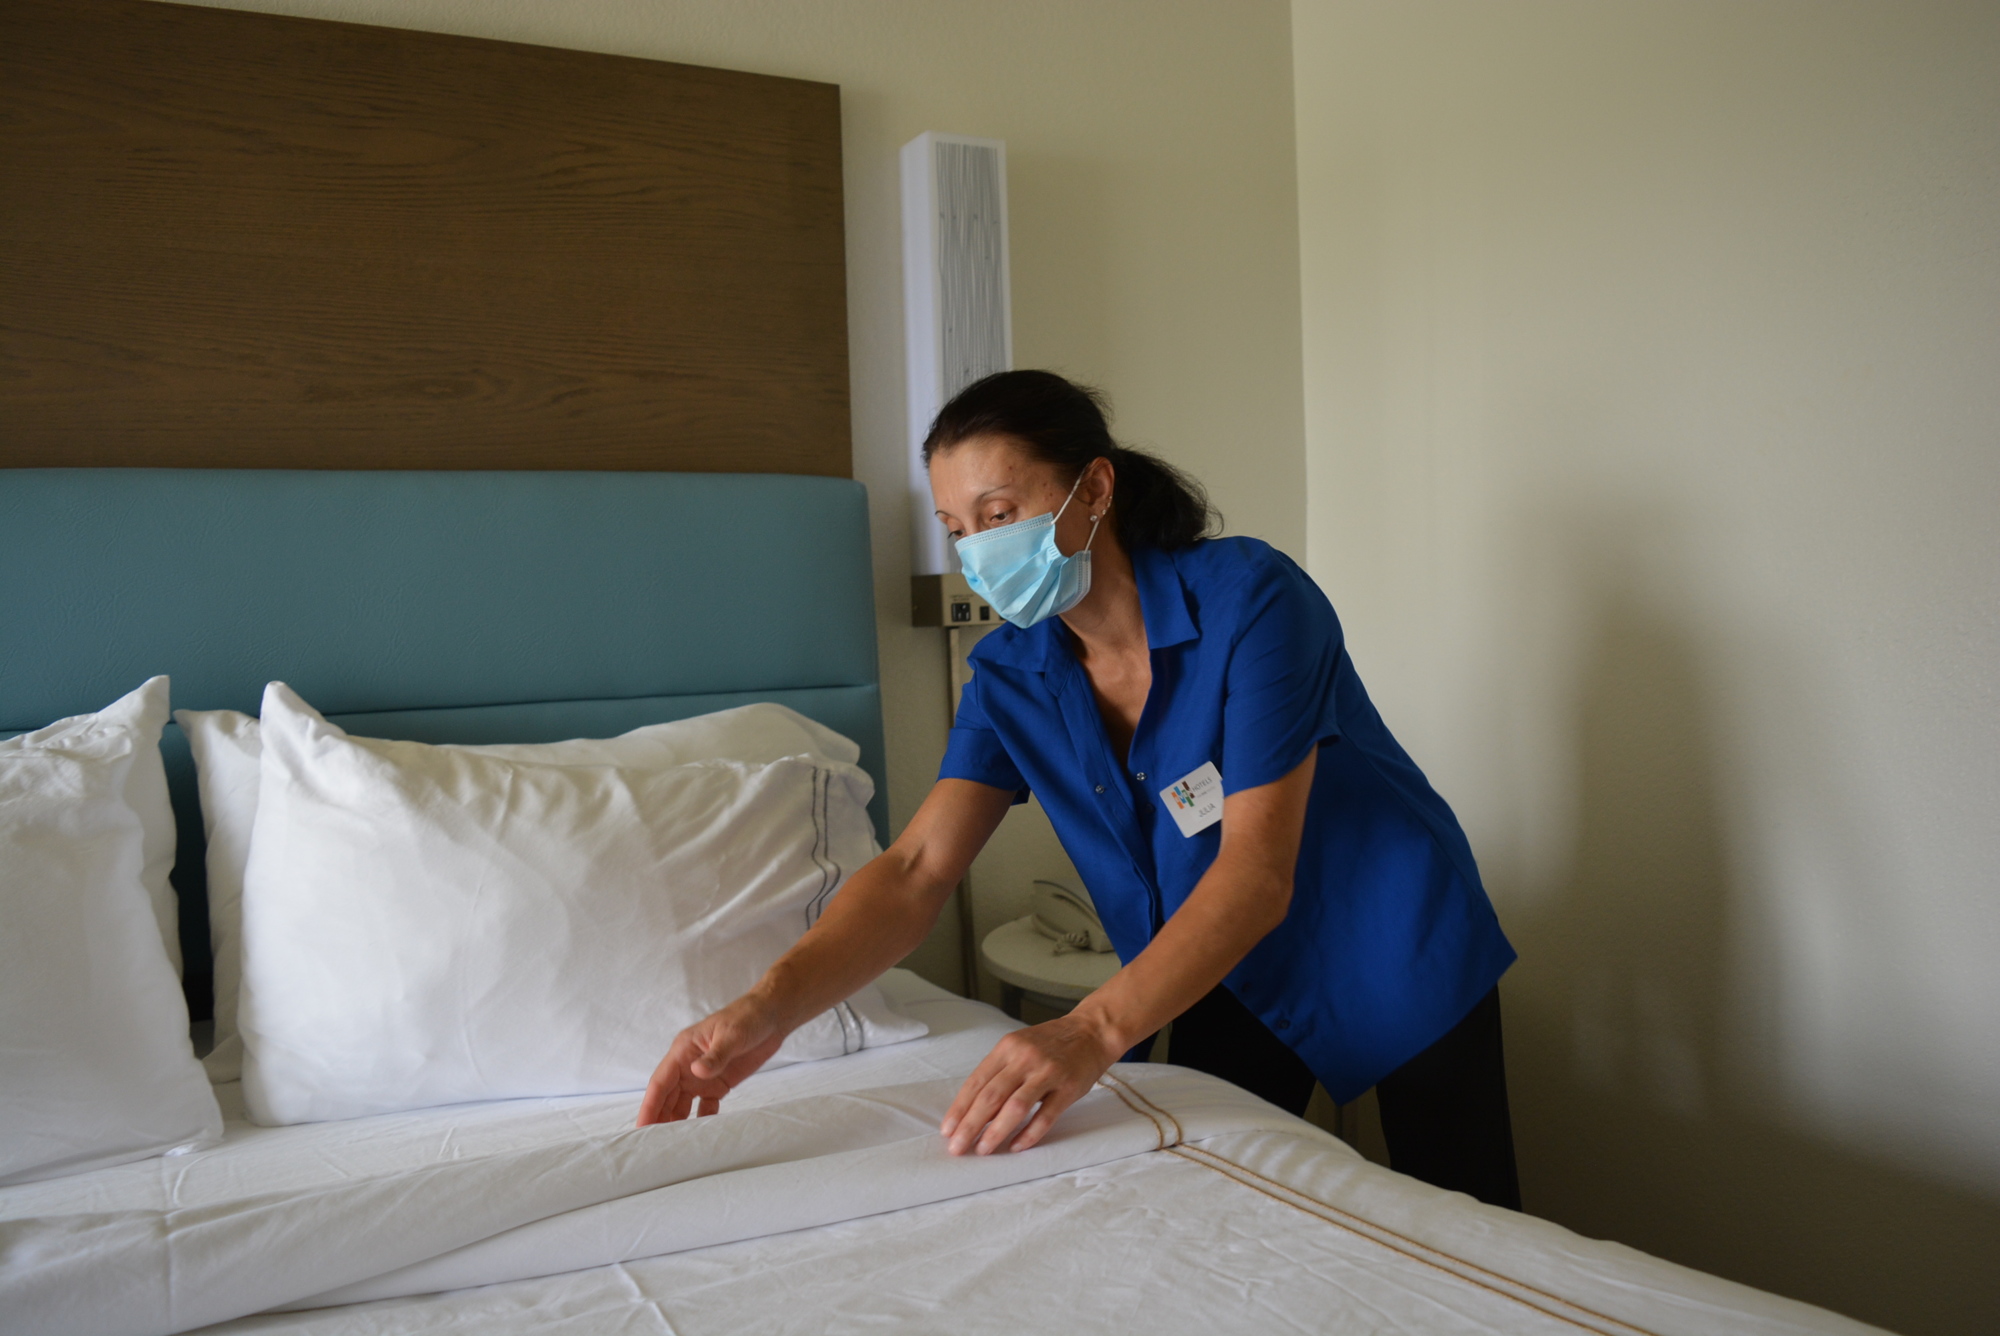 Housekeeper Julia Minayeva prepares a room at EVEN Hotel for its next guest. The hotel was sold-out for Labor Day weekend for only the second time since the pandemic began.